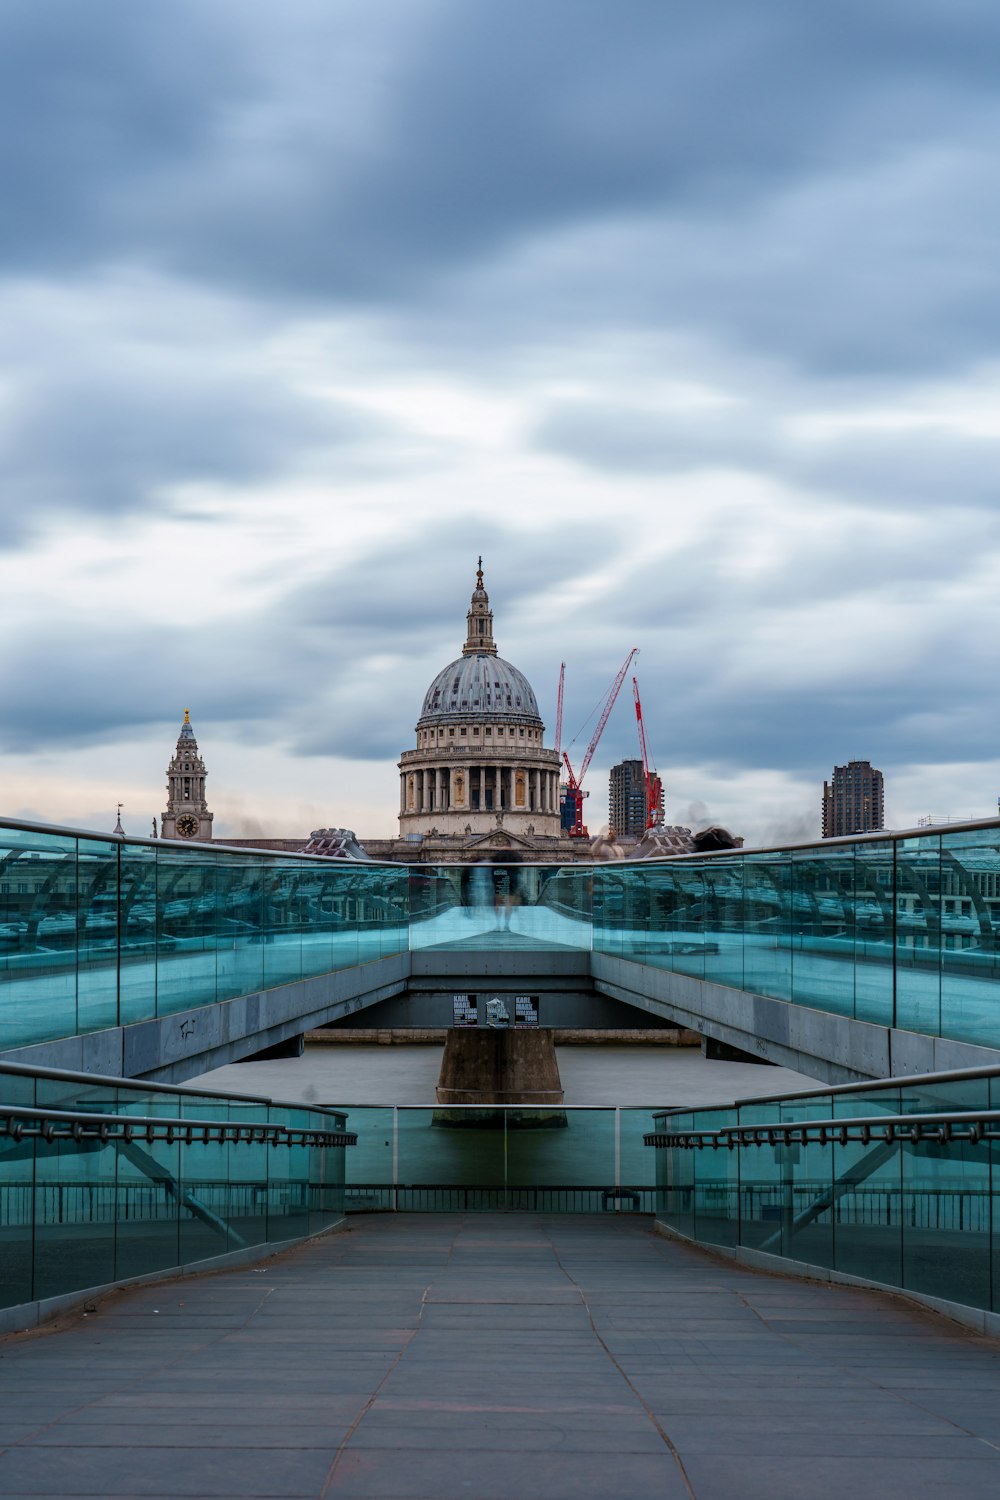 a bridge with a view of the dome of st paul's cathedral in the